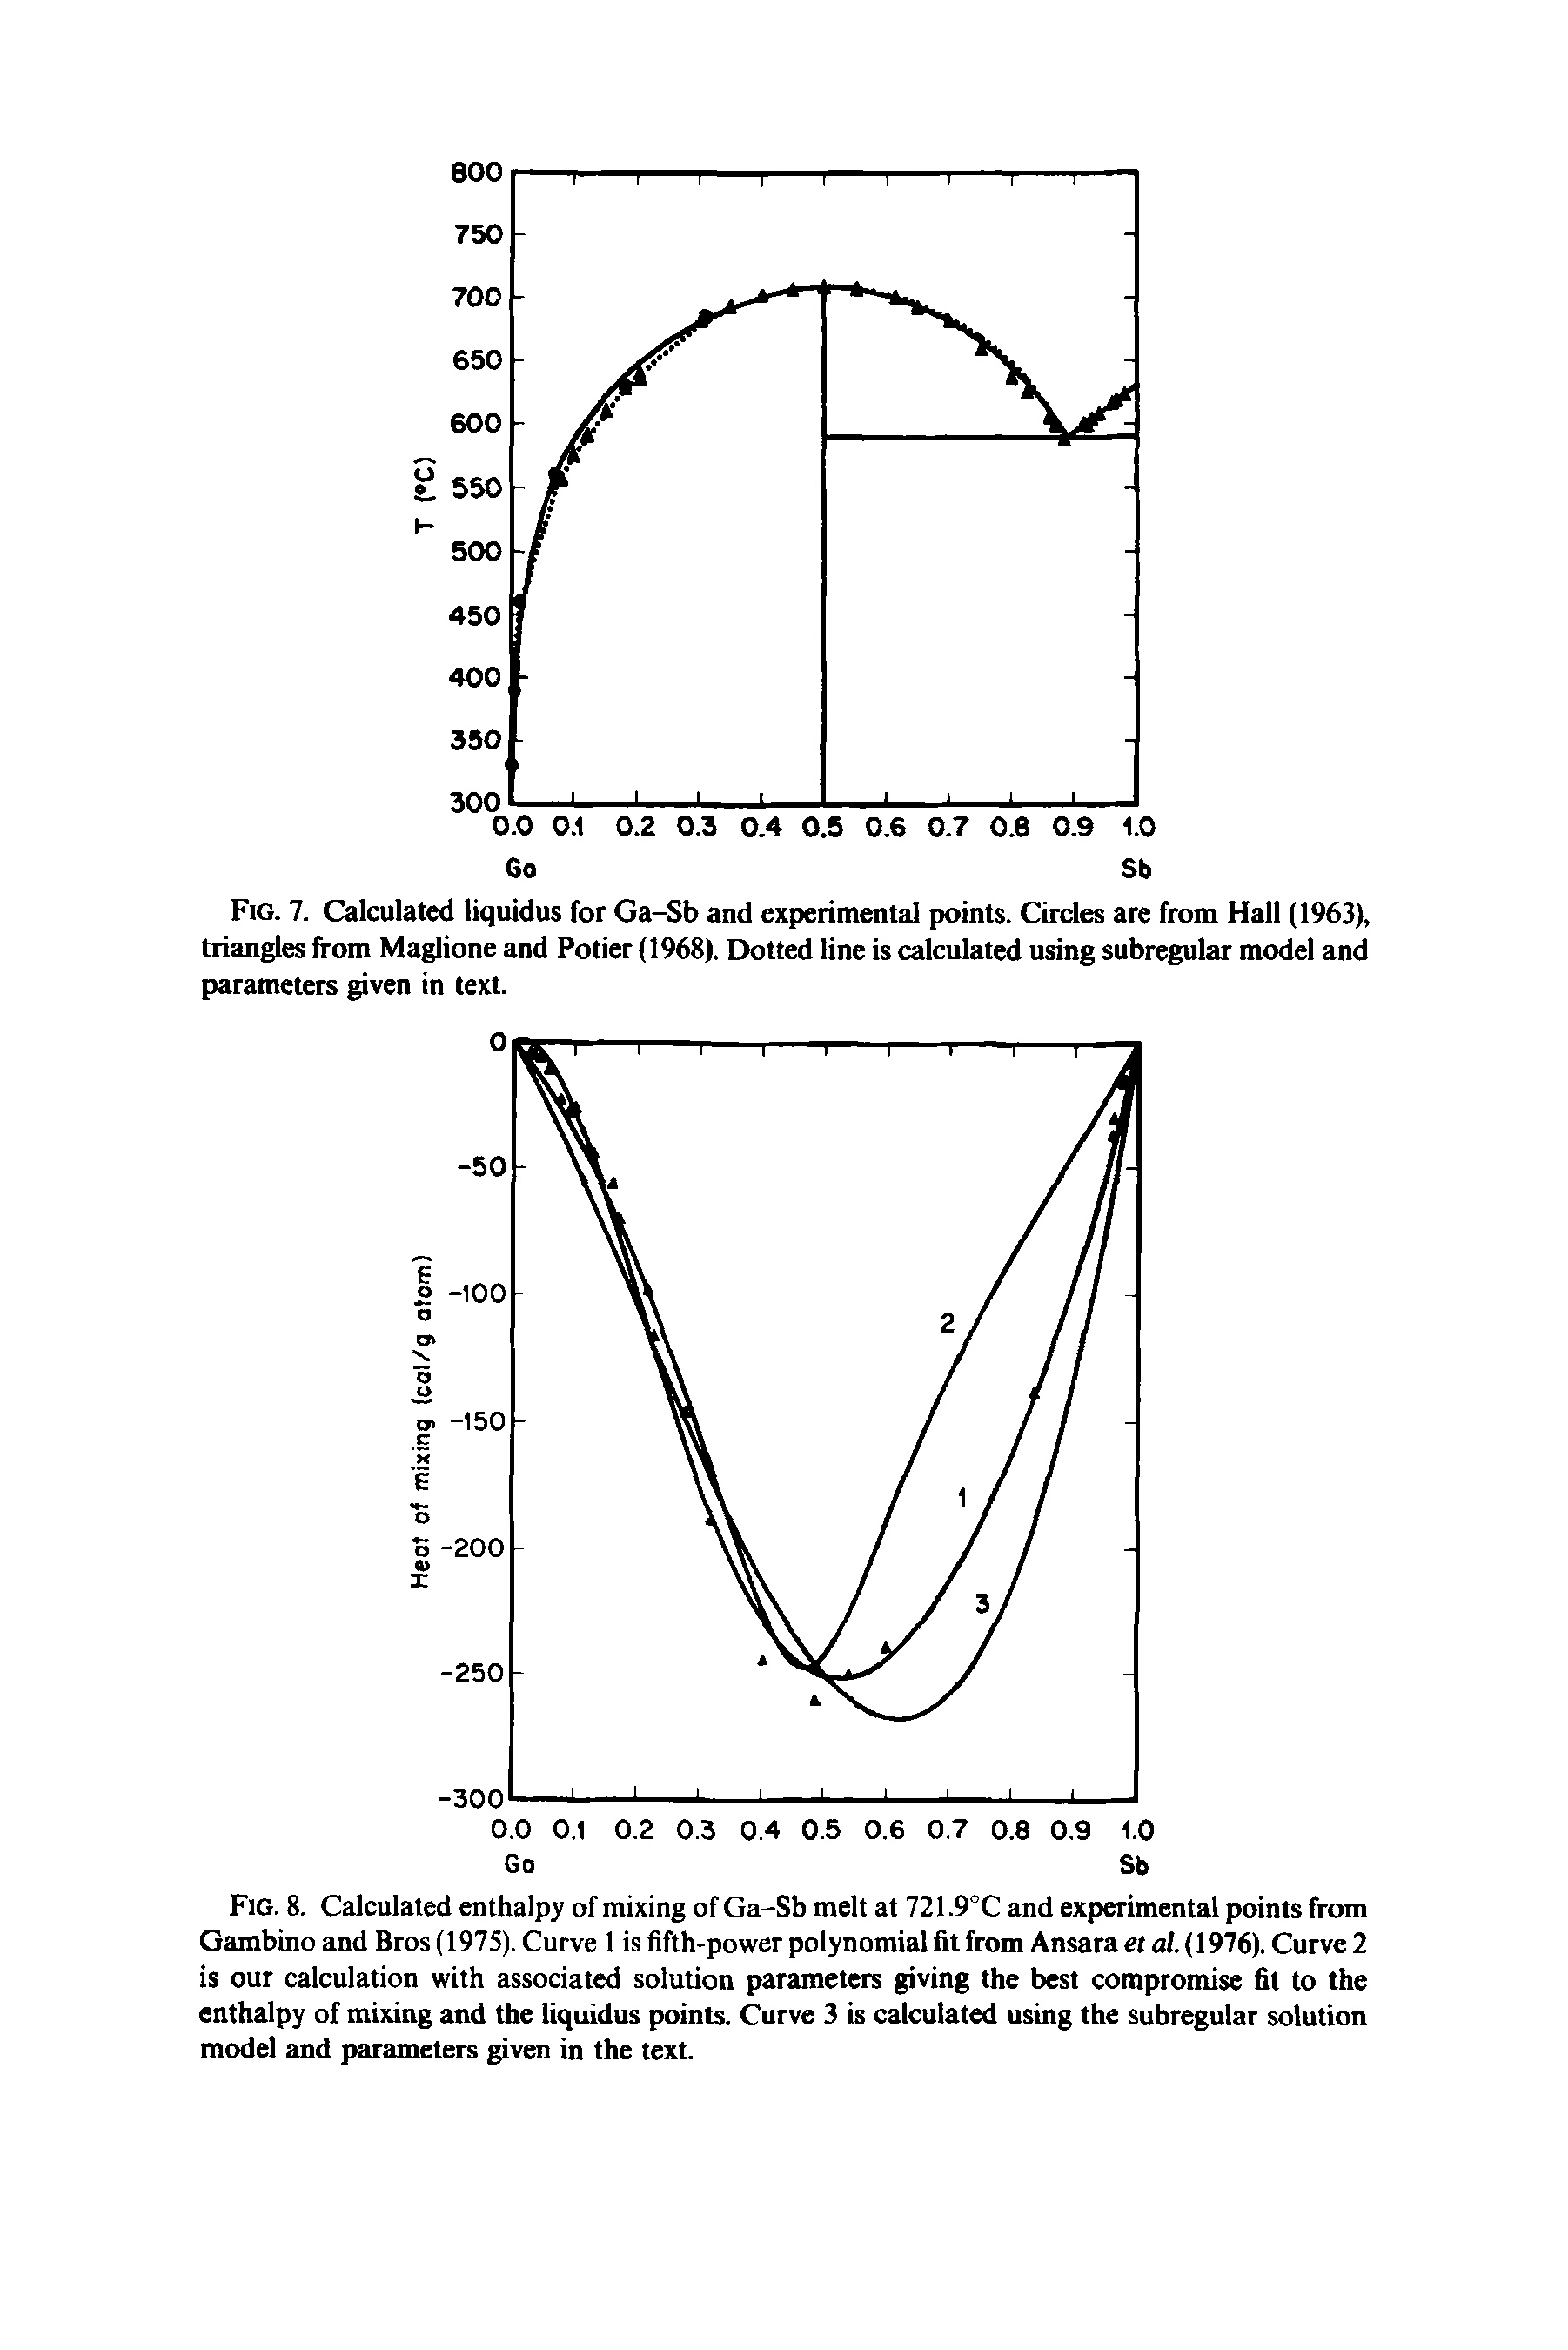 Fig. 8. Calculated enthalpy of mixing of Ga-Sb melt at 721.9°C and experimental points from Gambino and Bros (1975). Curve 1 is fifth-power polynomial fit from Ansara et al. (1976). Curve 2 is our calculation with associated solution parameters giving the best compromise fit to the enthalpy of mixing and the liquidus points. Curve 3 is calculated using the subregular solution model and parameters given in the text.